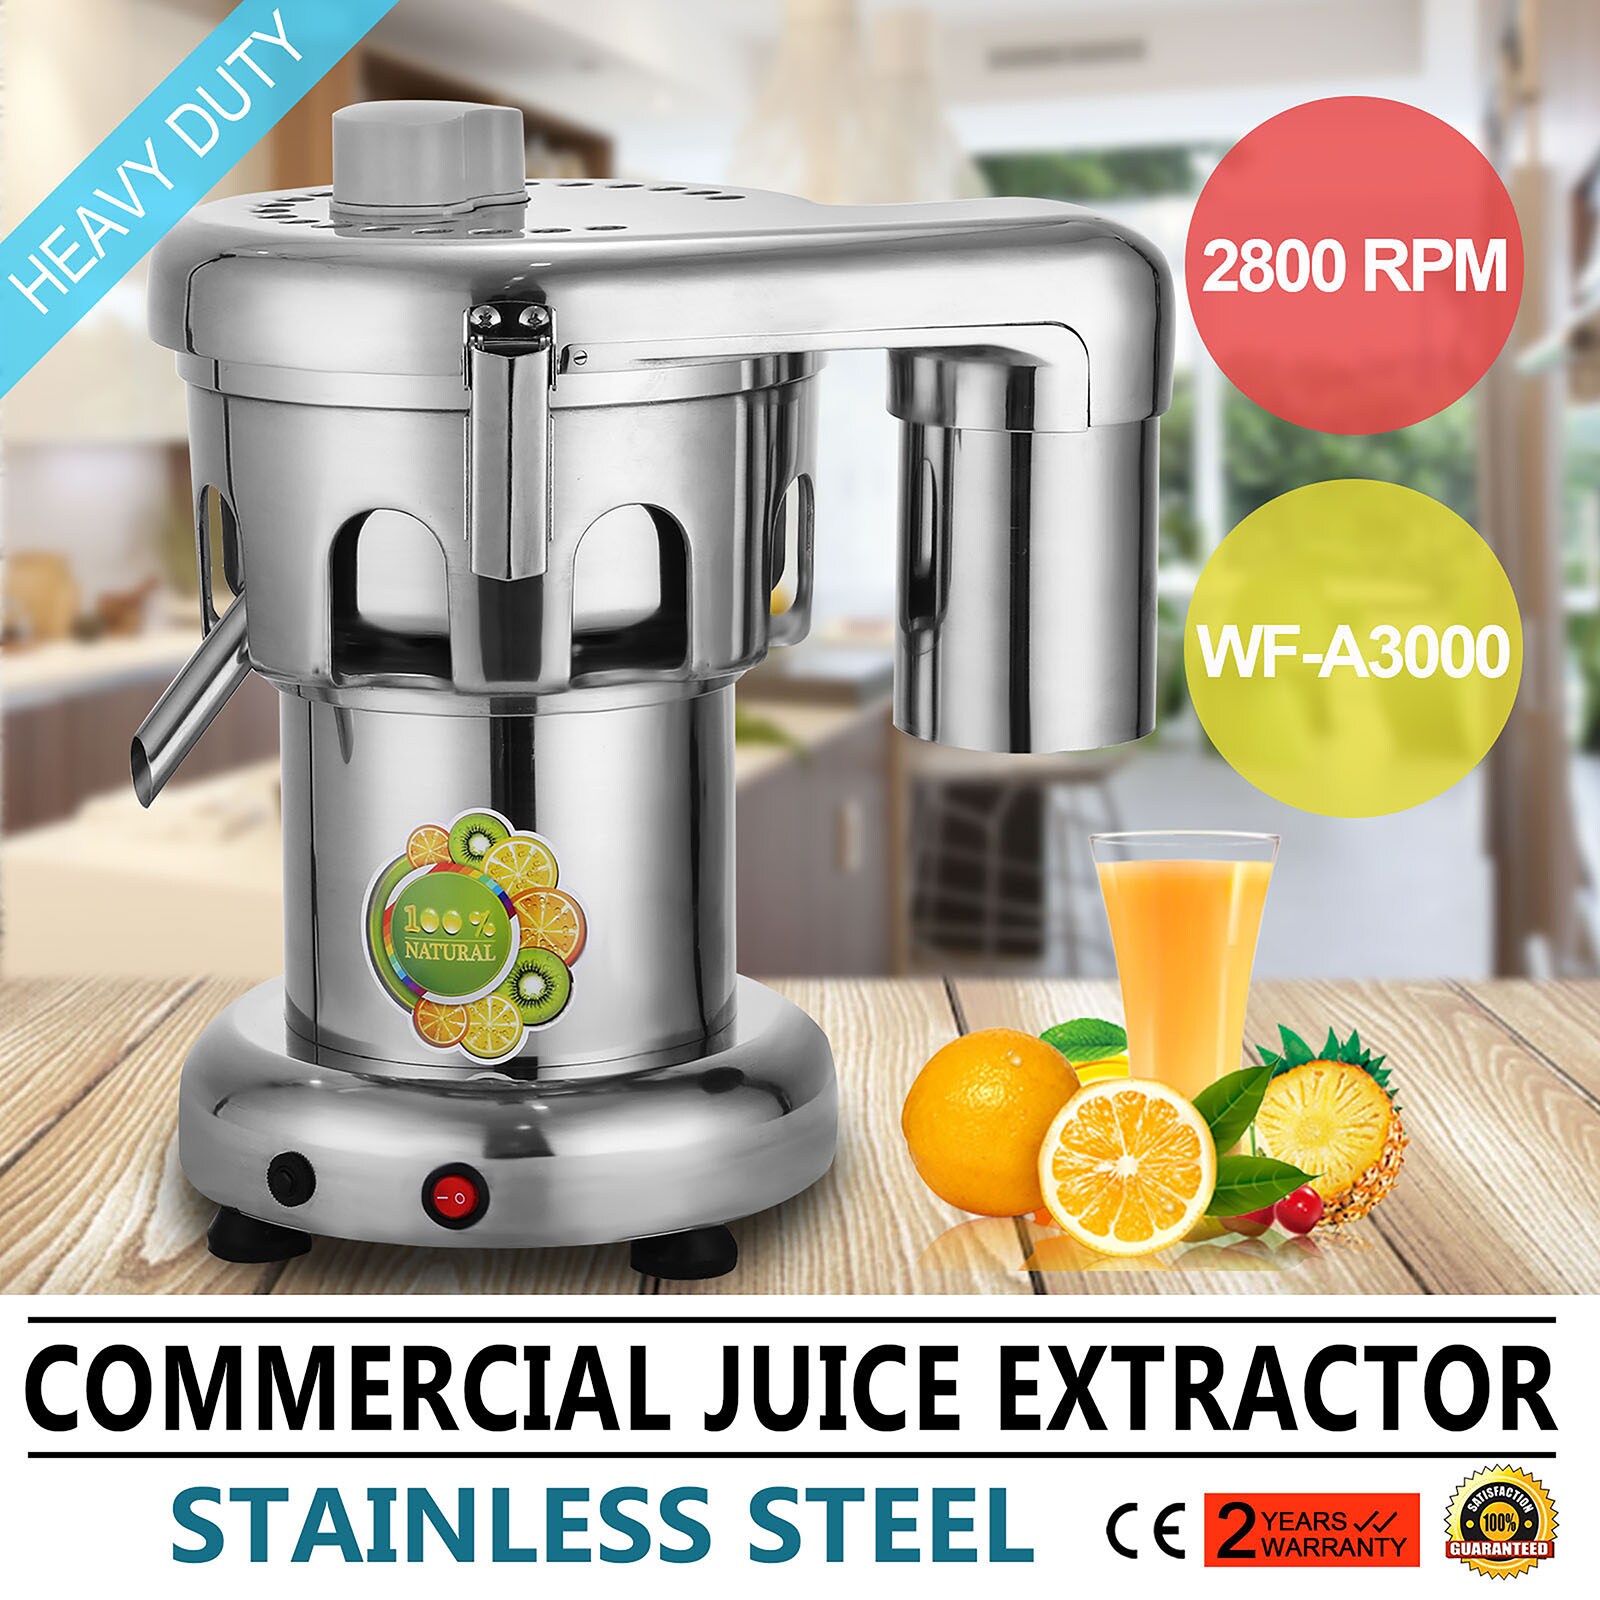 VEVOR Commercial Silver Juice Extractor Aluminum Casting and Stainless